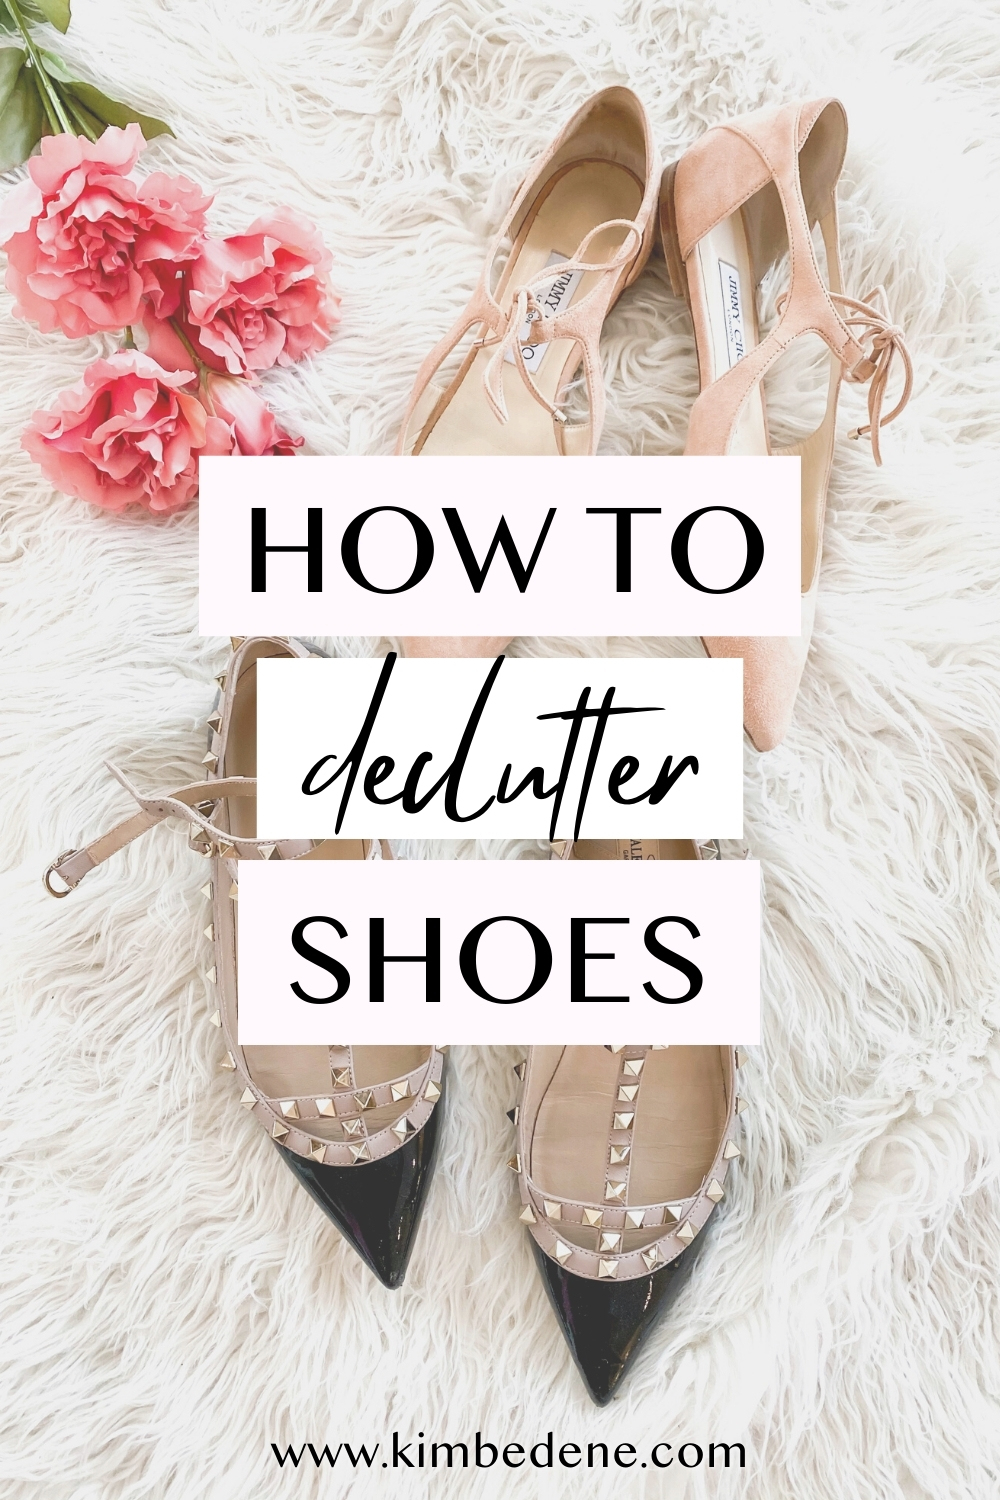 How to declutter shoes (even if you really love them!) - Kim Bedene